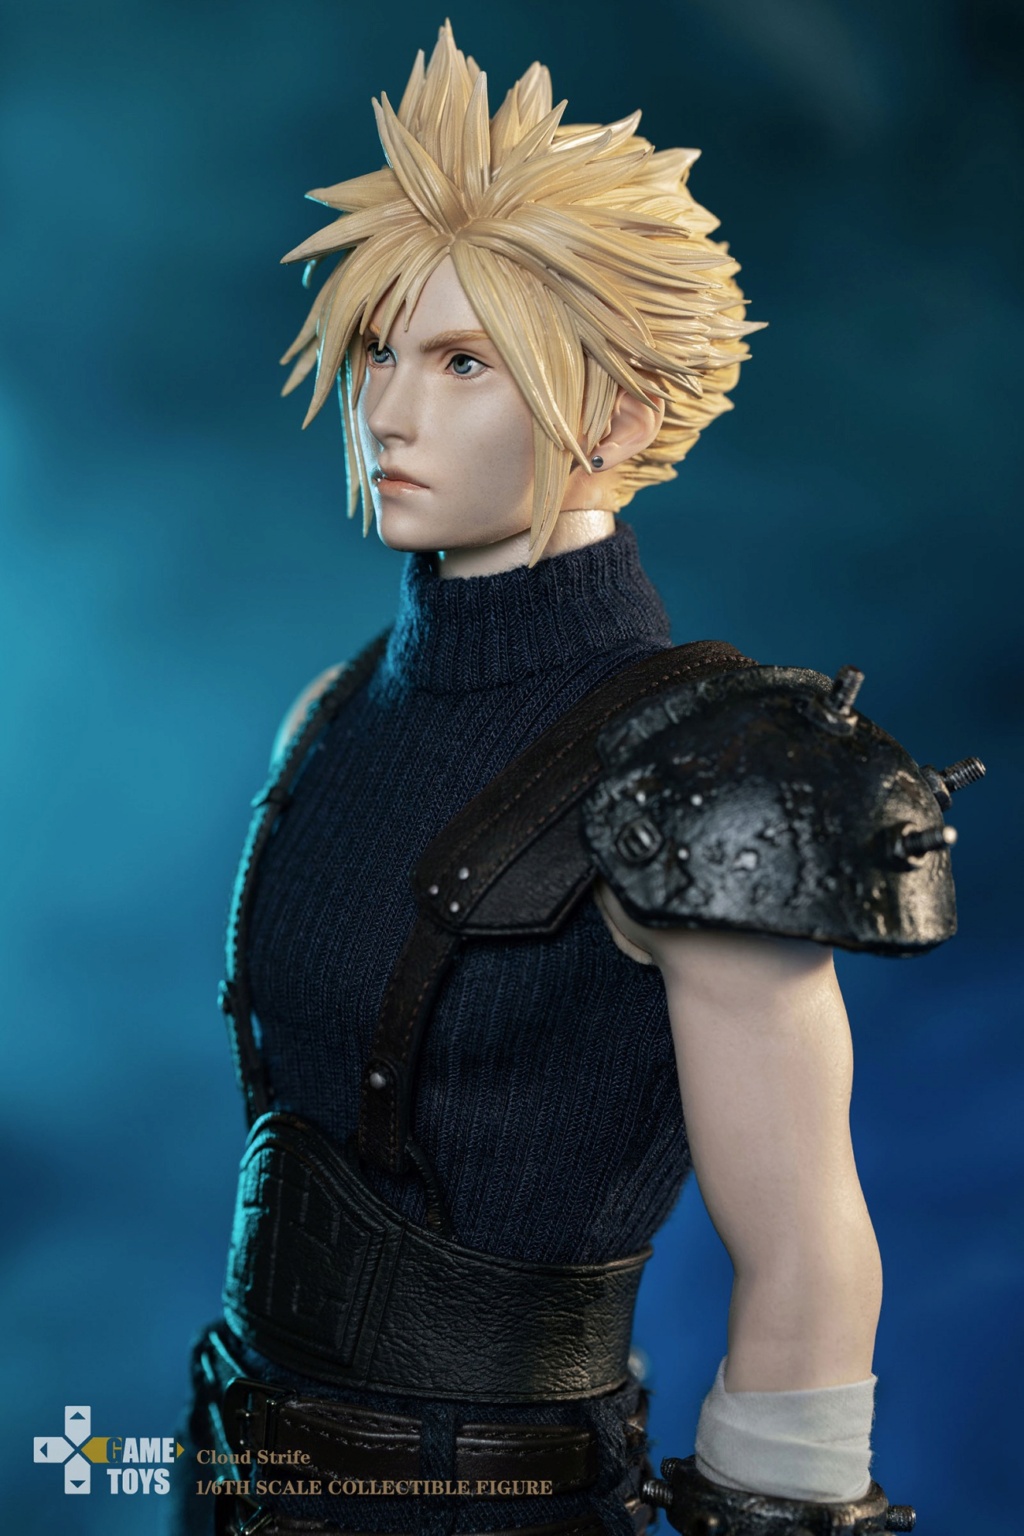 videogame-based - NEW PRODUCT: GameToys: 1/6 Fantasy Warrior Cloud Cloud GT-002 Action Figure 15202610